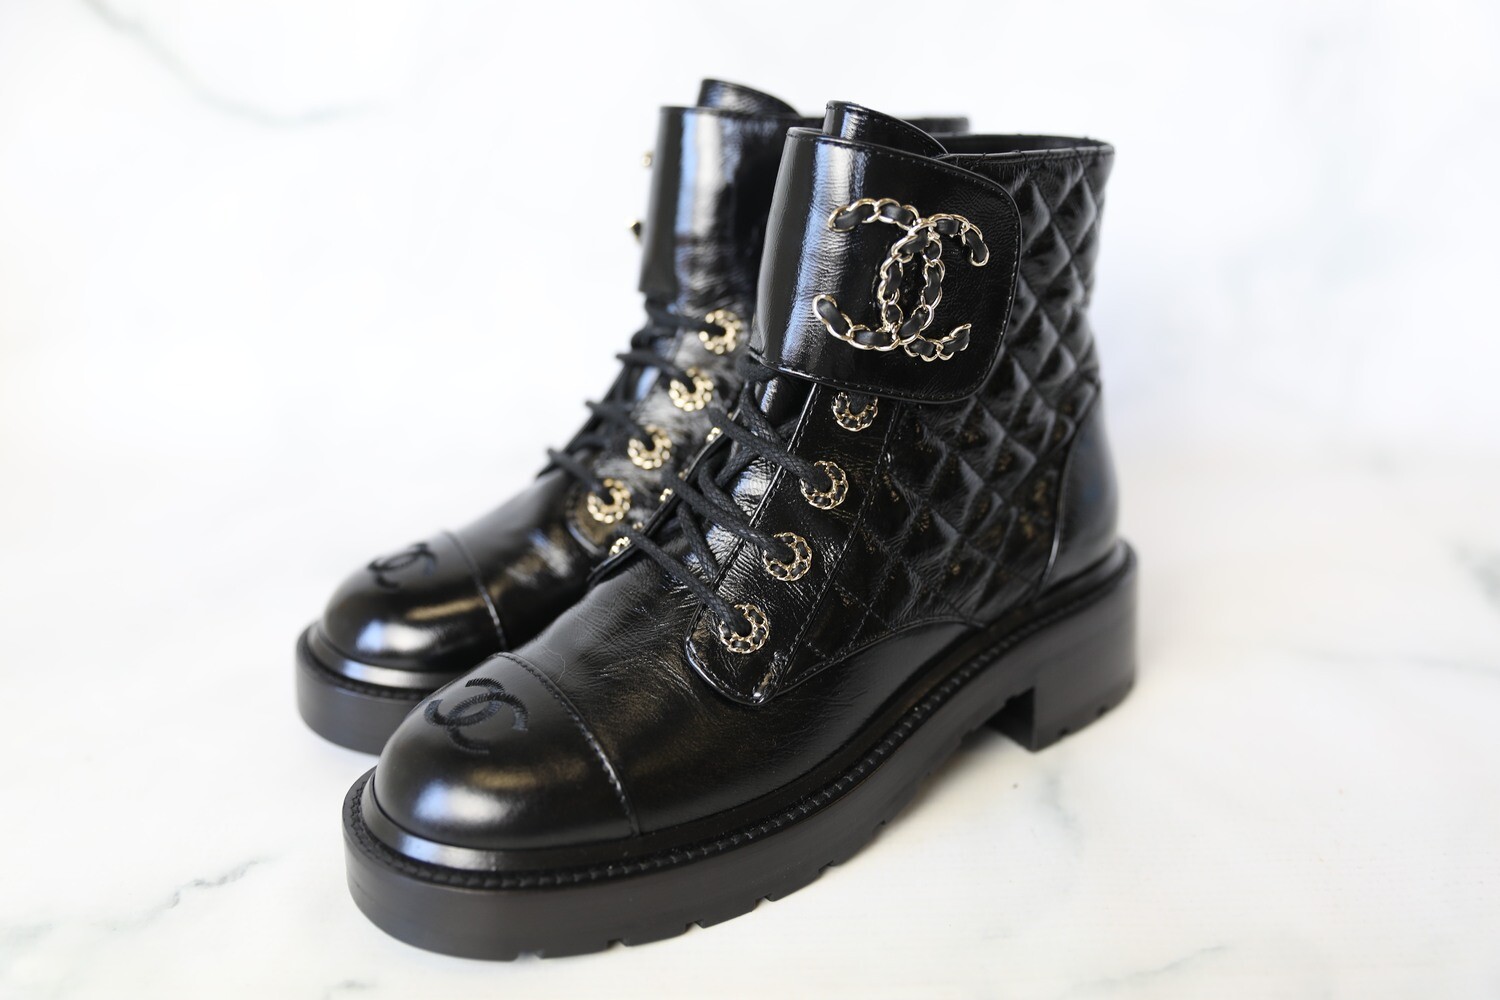 Chanel Quilted Combat Boots, Glazed Calfskin, Size 37.5, New in Box WA001